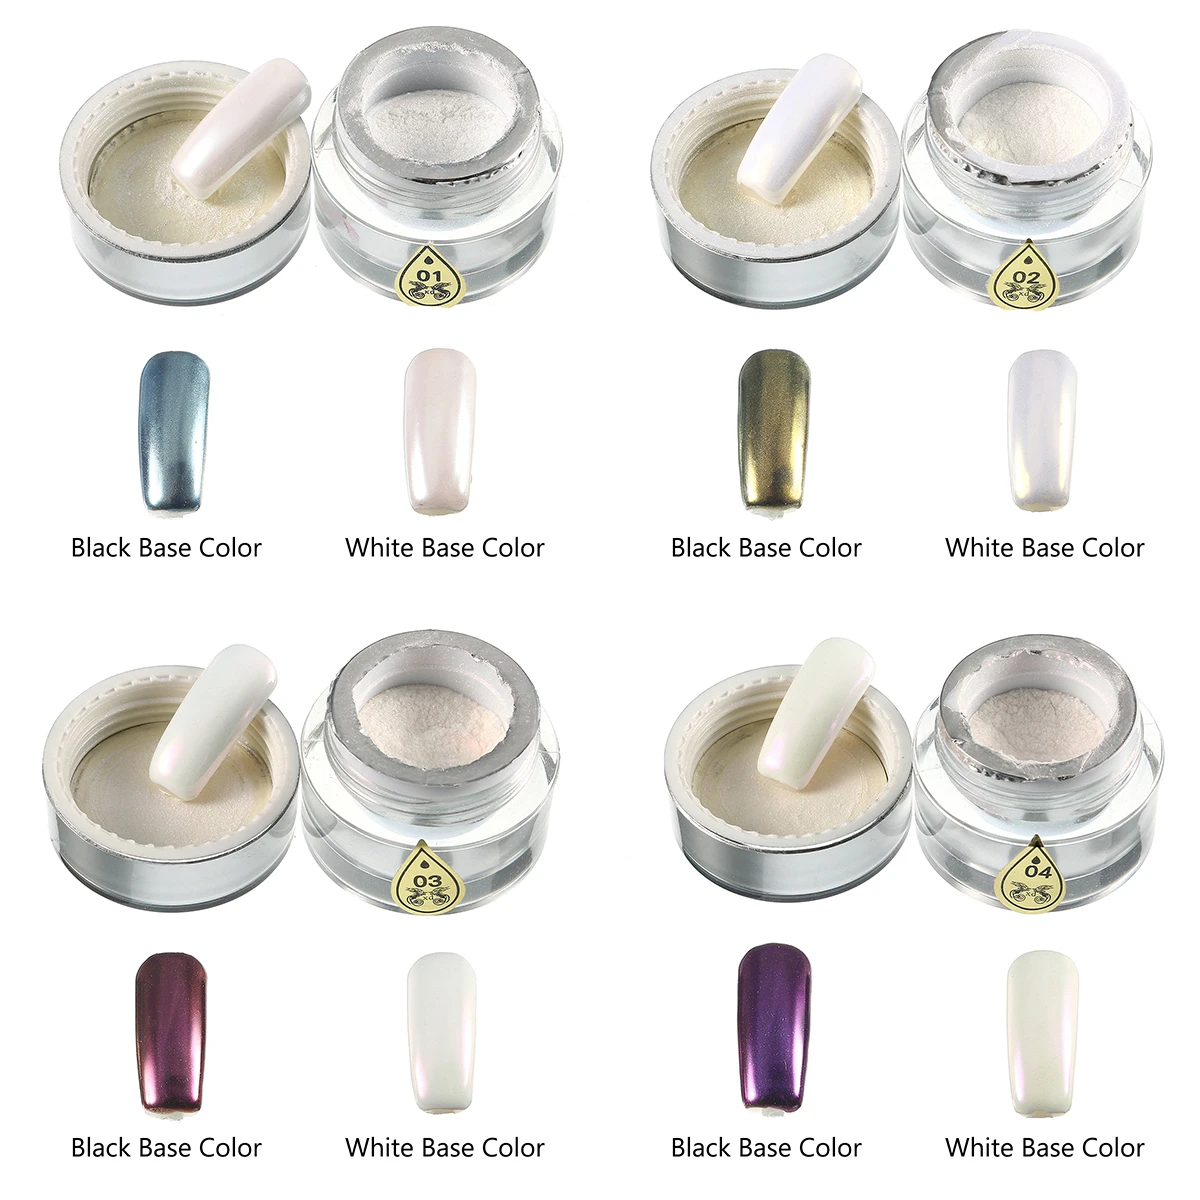 6 Colors Magic Mirror Chrome Pearl Shell Luster Powder Dust Decorations Glitter Pigment